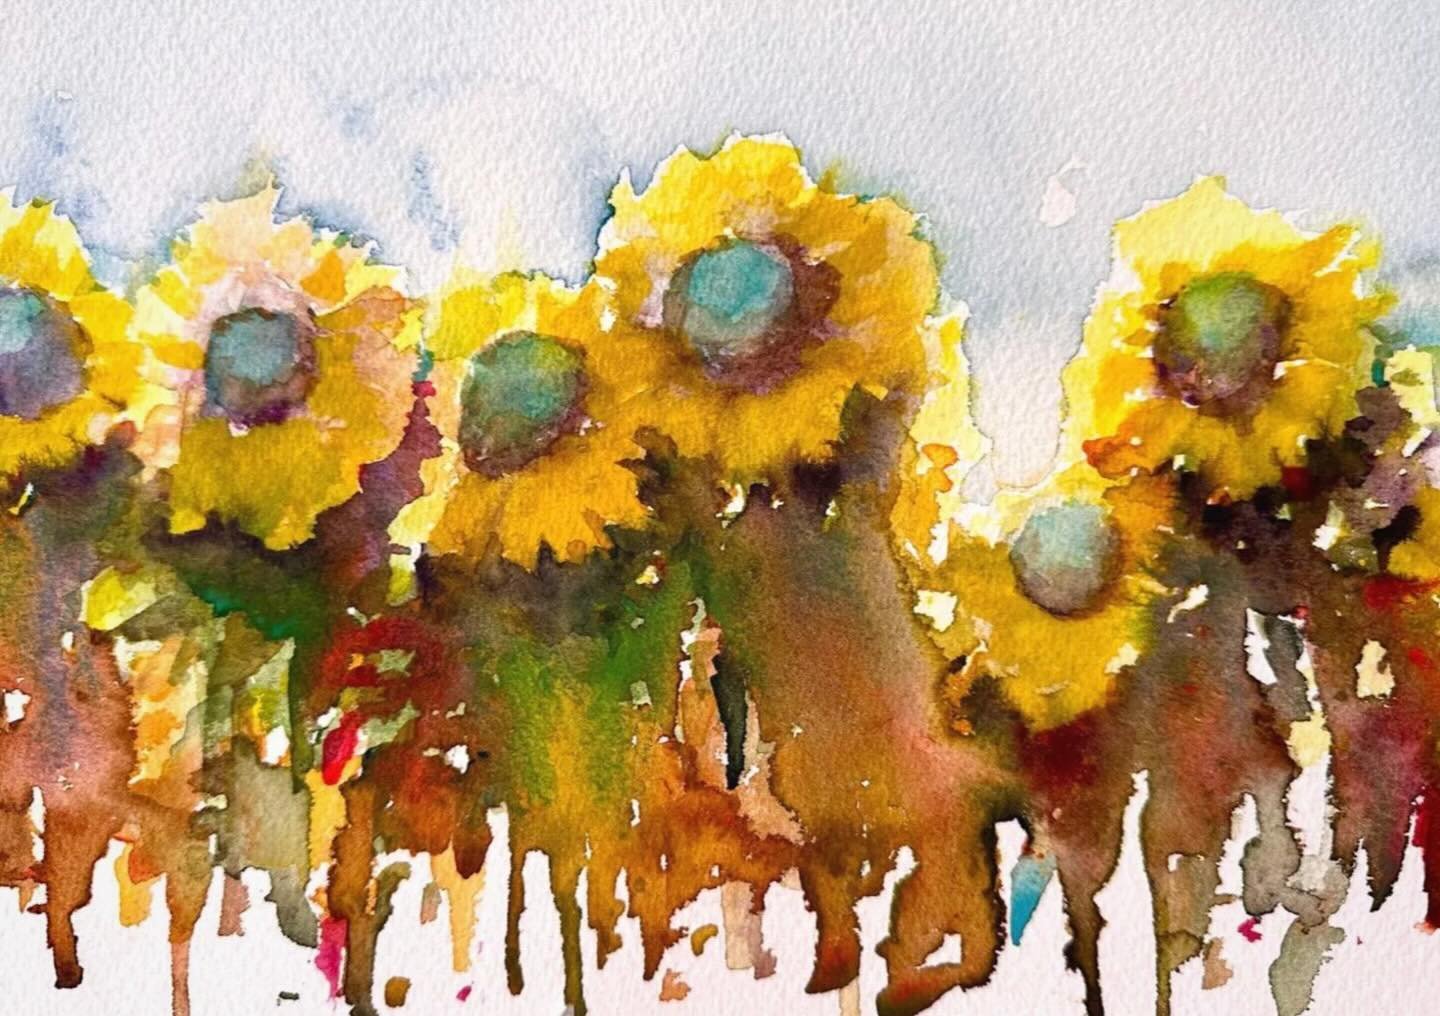 Sunflowers, watercolour on 7x10&rdquo; paper. It&rsquo;s always a joy to paint sunny sunflowers&hellip; guaranteed to lift my spirits! 
🌻🌻🌻🌻🌻

#watercolour #watercolor #watercolorart #watercolourart #watercolourpainting #watercolorpainting #wate